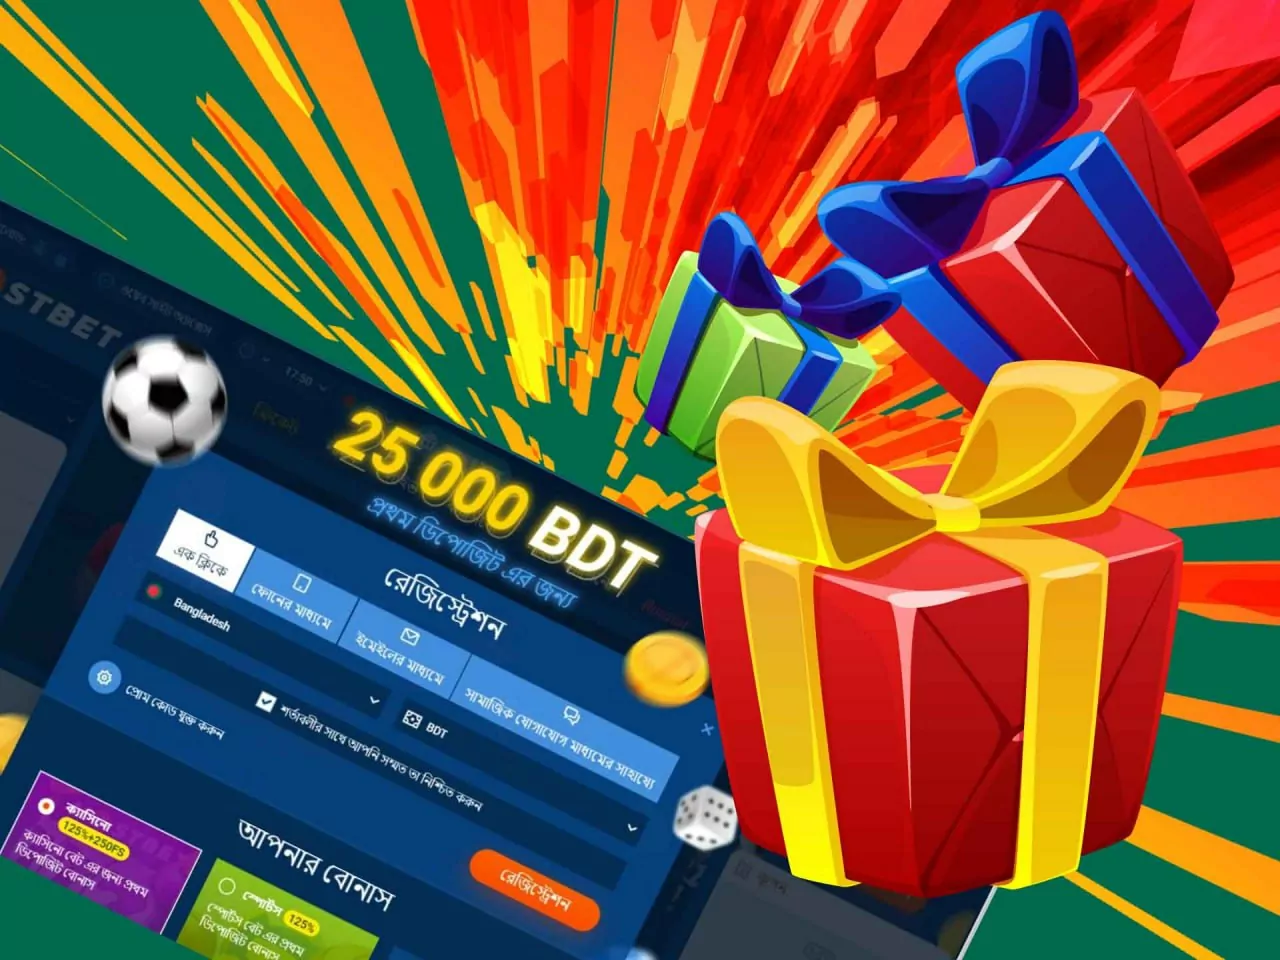 Every new bettor can get up to 25,000 BDT for the first deposit.